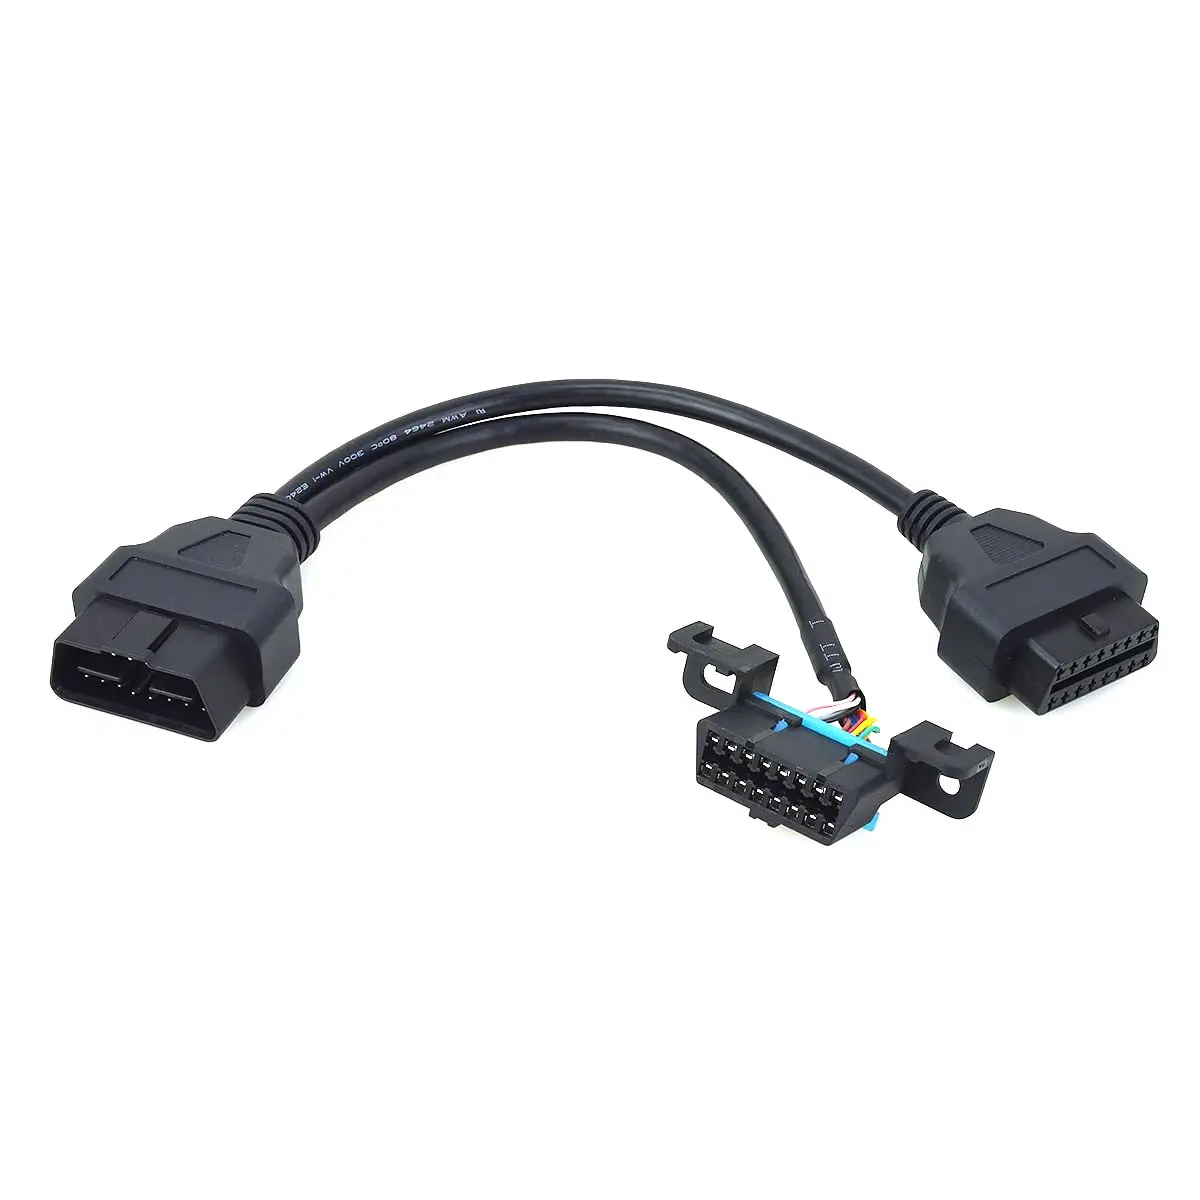 

Universal OBD2 OBD II 16 Pin Splitter Y Open Cable, J1962 1 Male to 2 Female Connector with Underdash Mount Bracket，30cm/12 inch